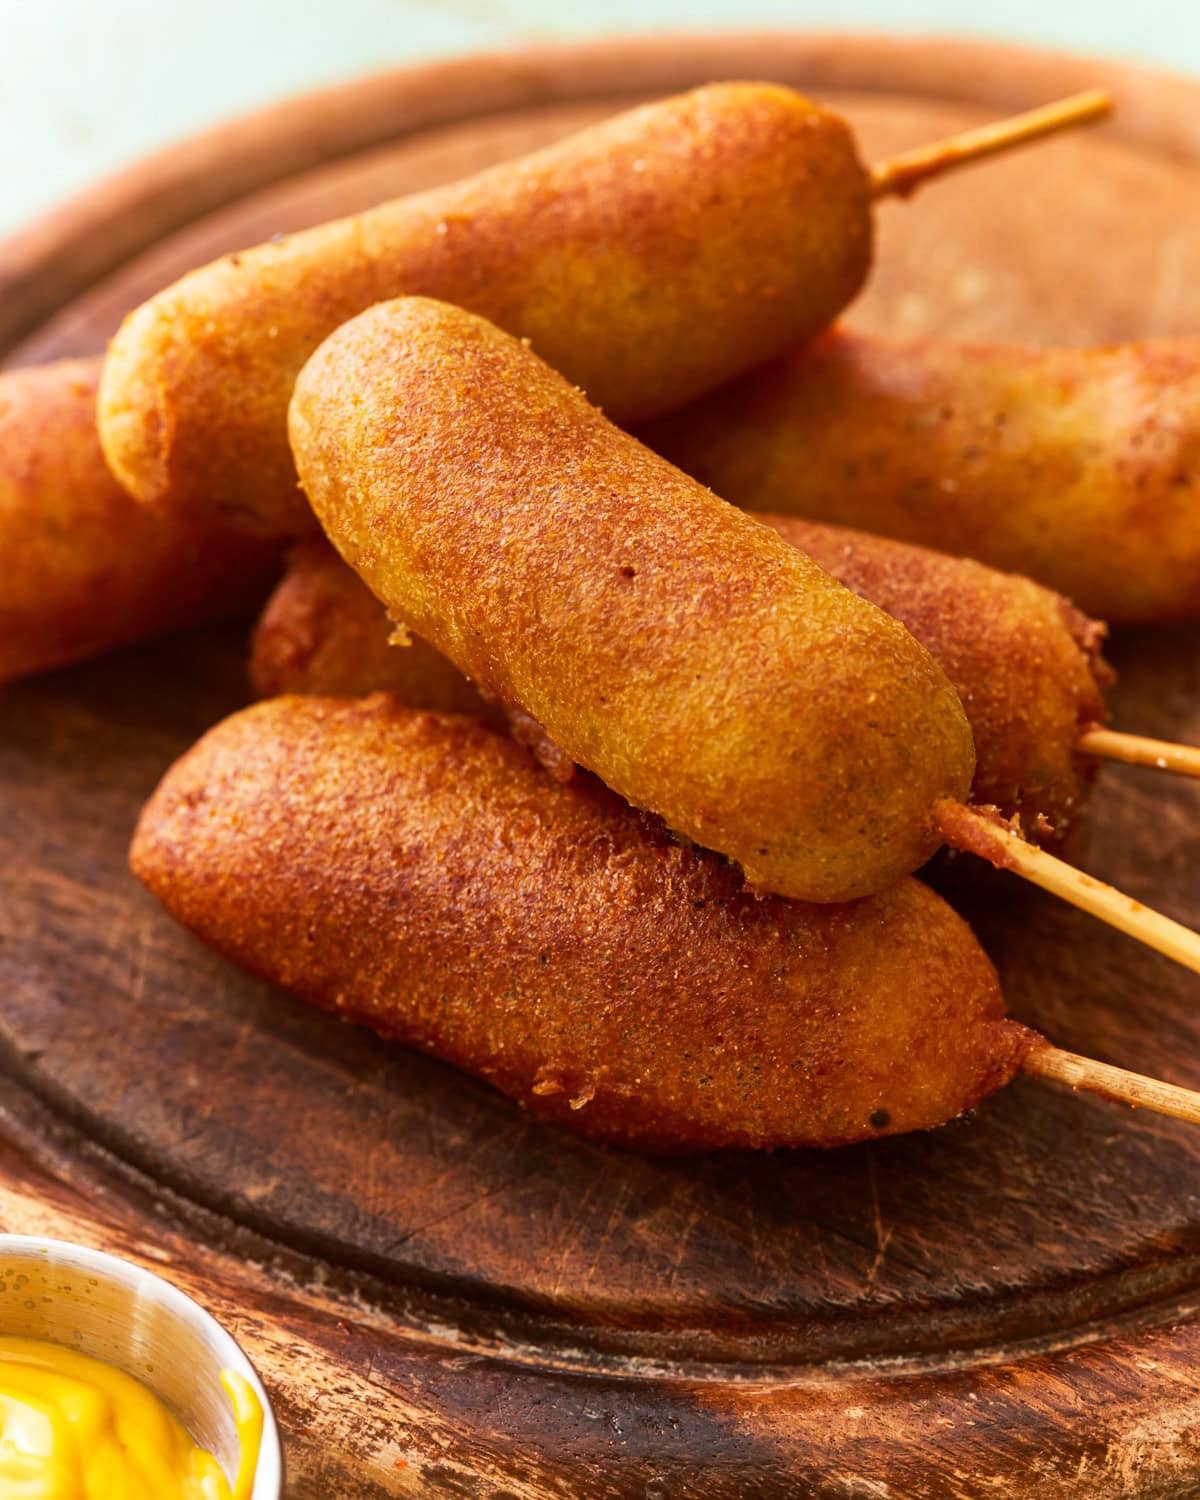 gluten free corn dogs on a wooden plate.